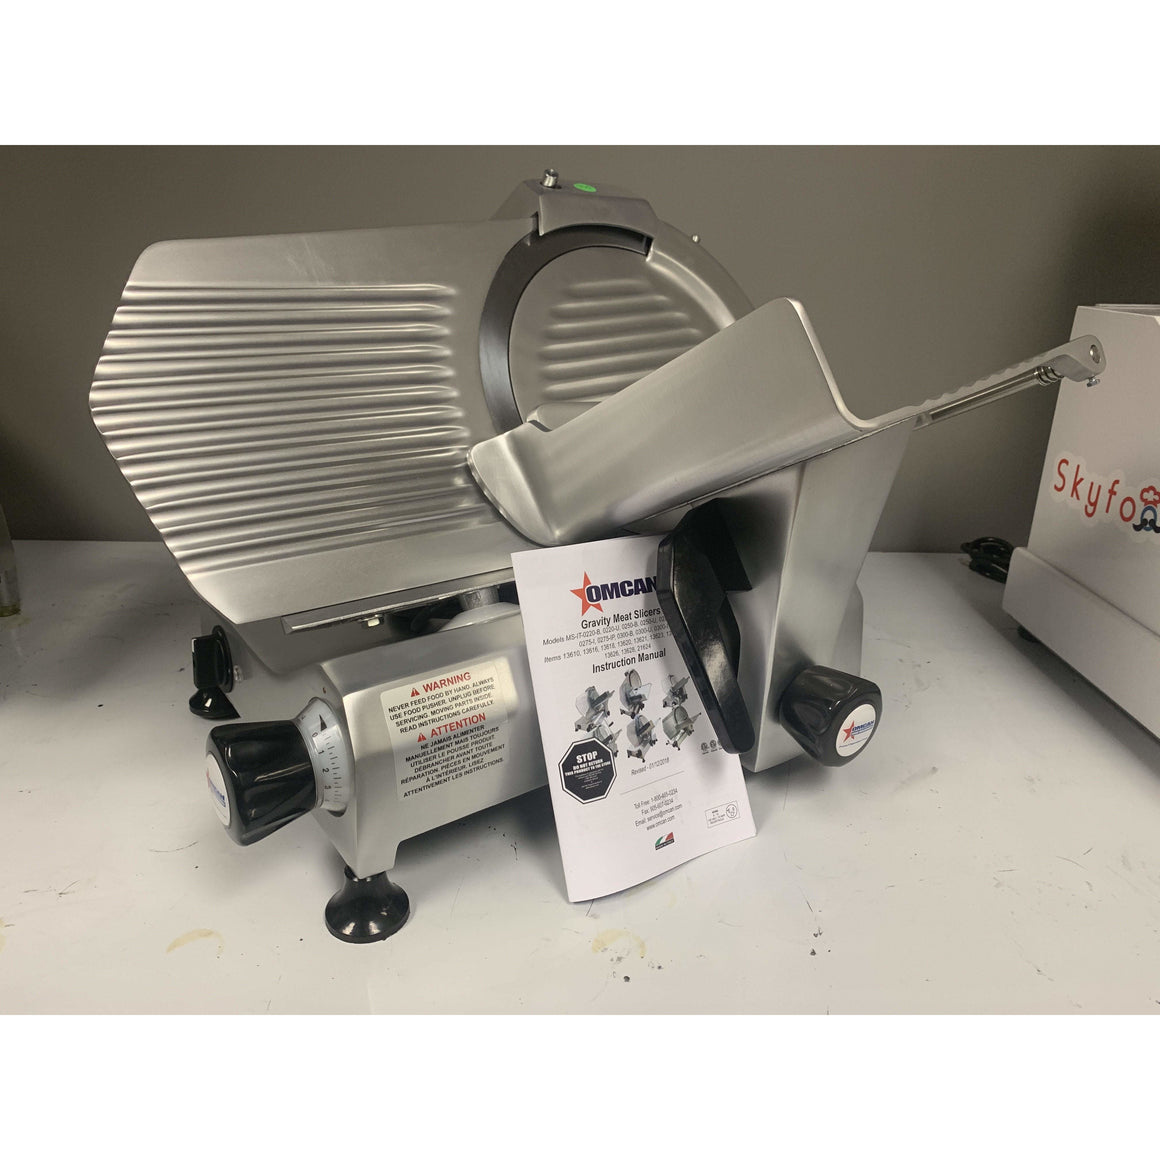 NEW MEAT/CHEESE DELI SLICER - Maltese & Co New and Used  restaurant Equipment 